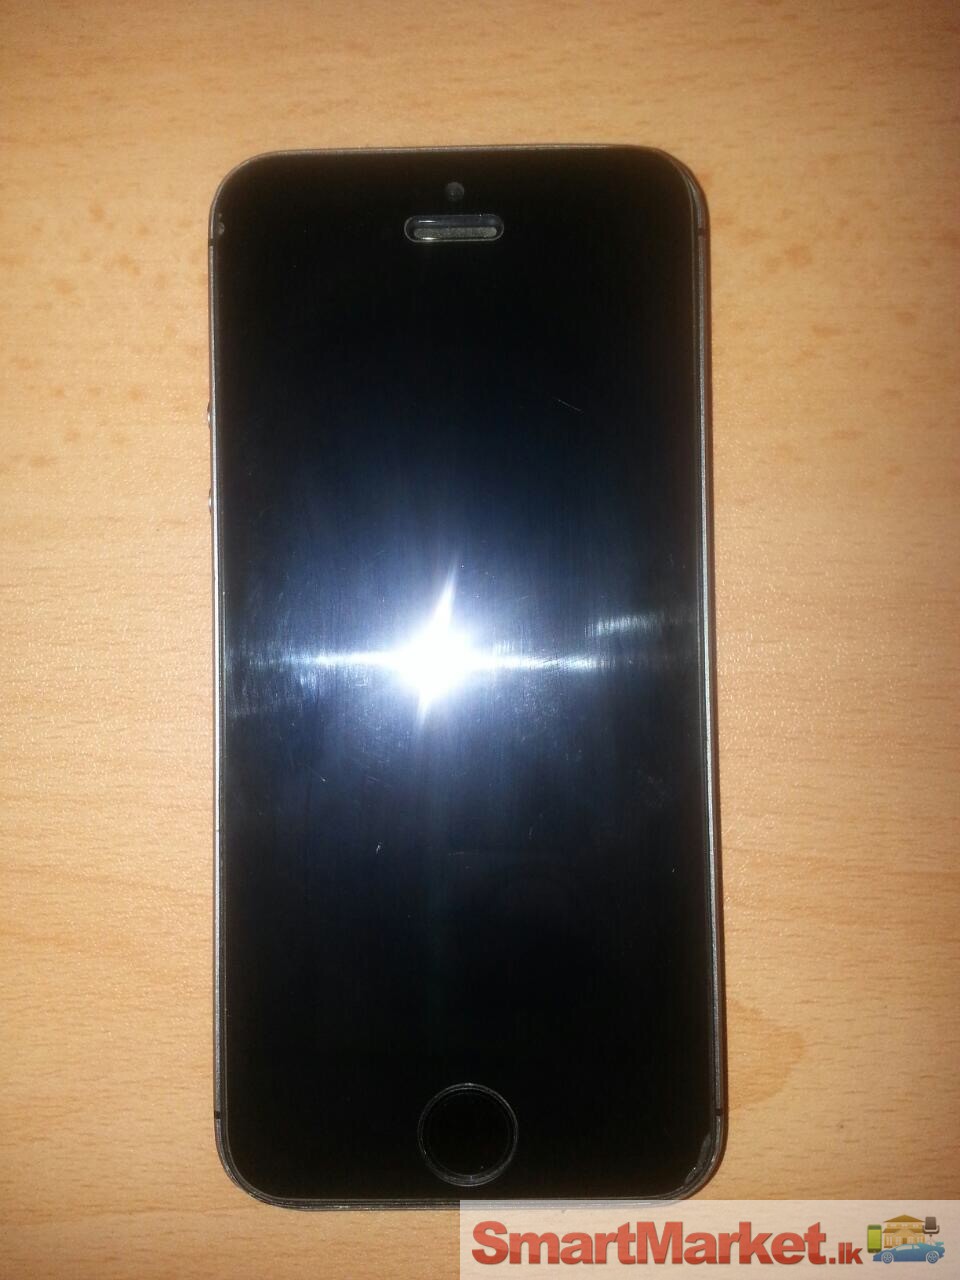 Iphone 5s 16GB Space Grey